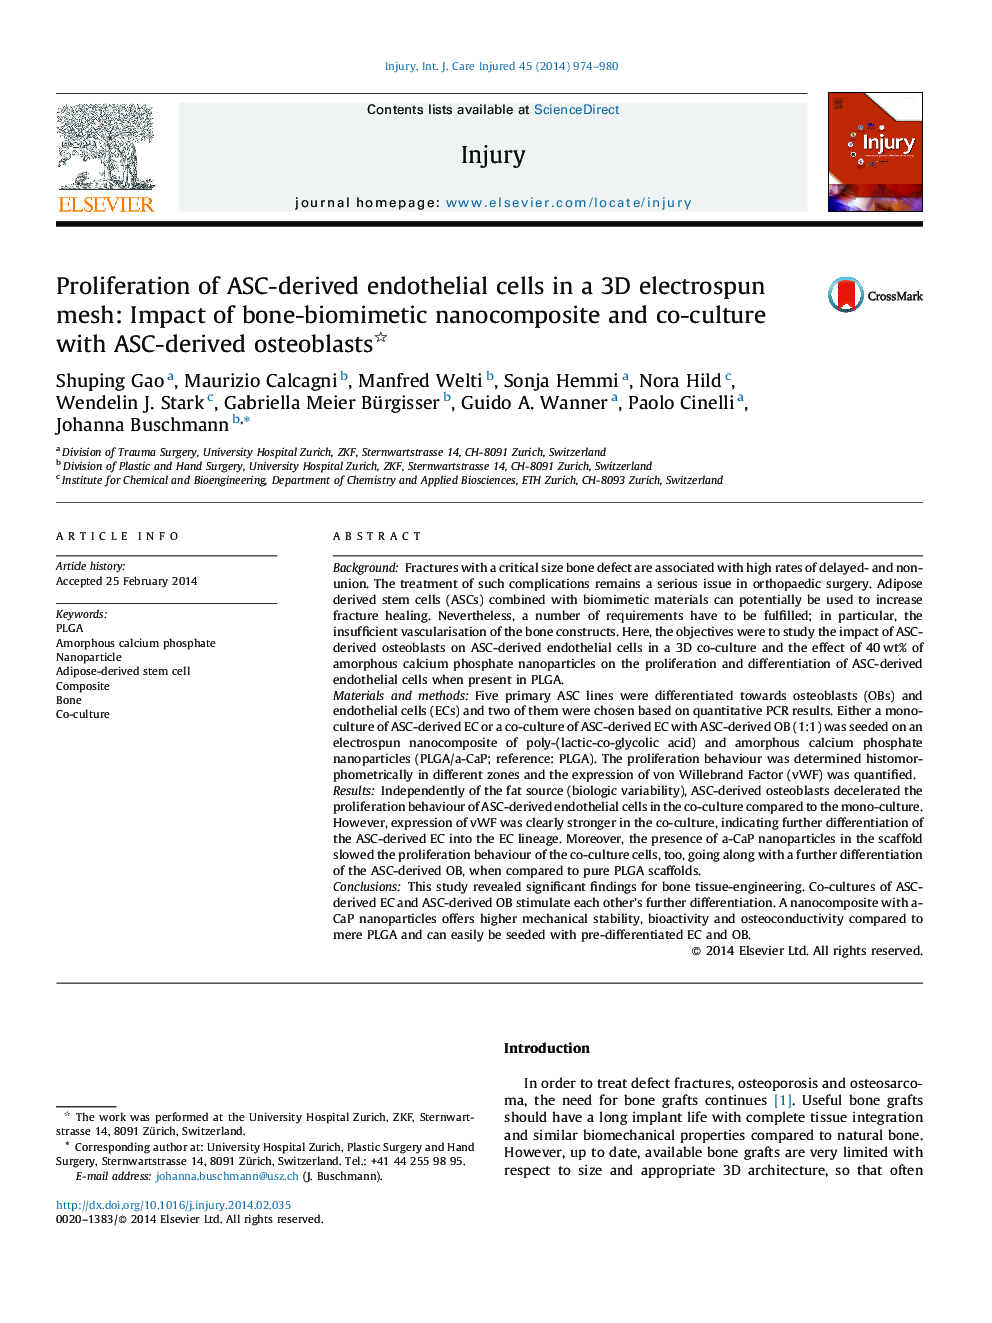 Proliferation of ASC-derived endothelial cells in a 3D electrospun mesh: Impact of bone-biomimetic nanocomposite and co-culture with ASC-derived osteoblasts 